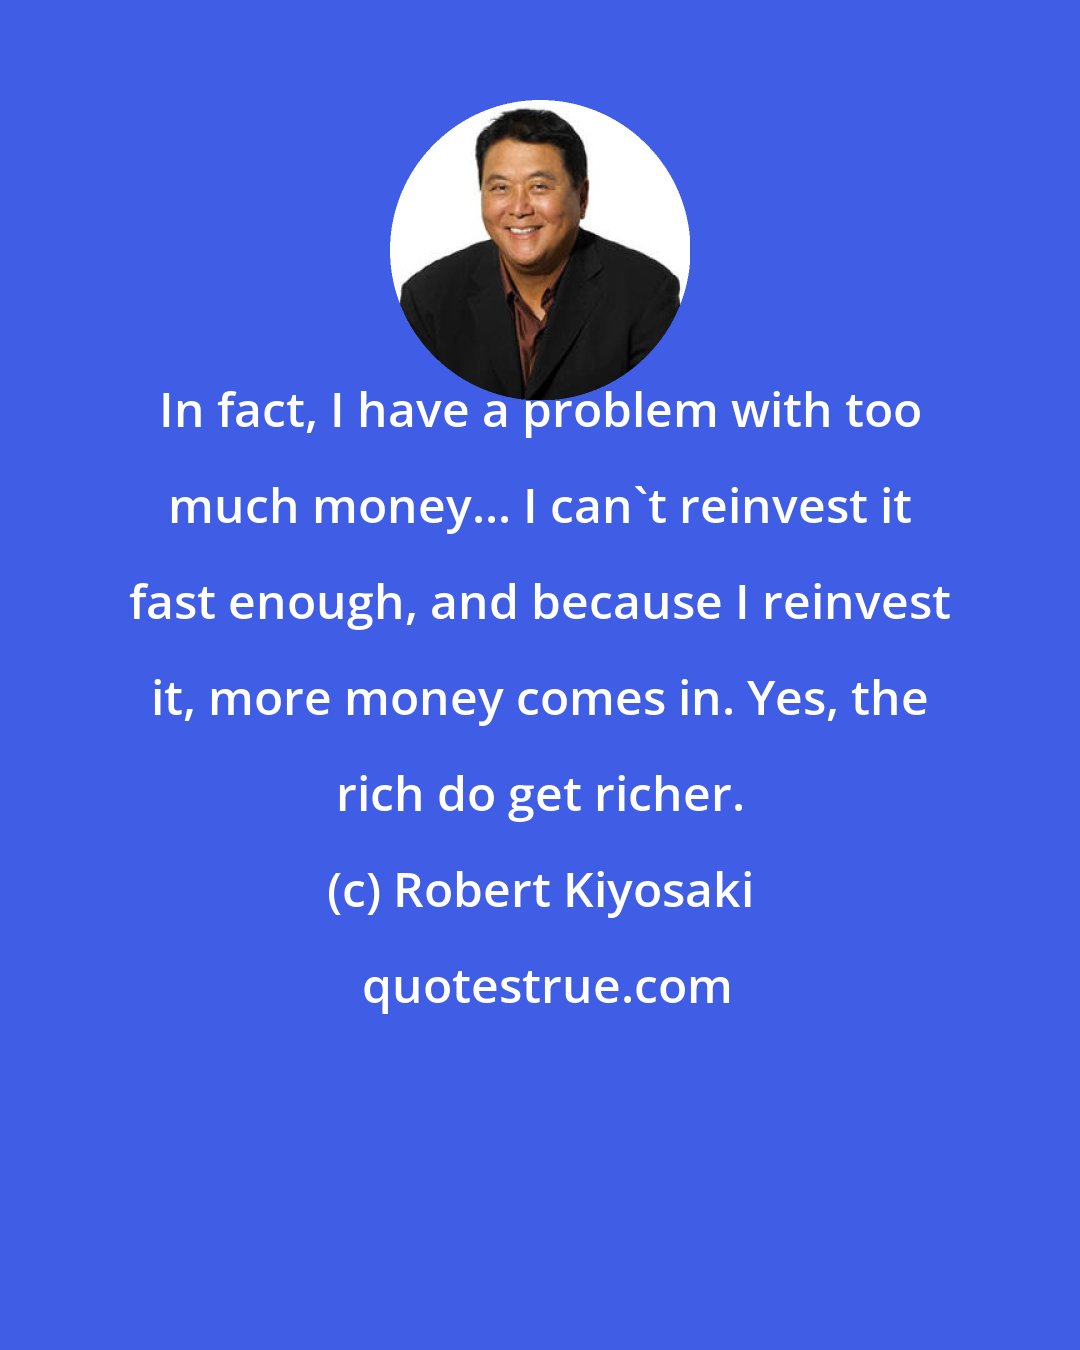 Robert Kiyosaki: In fact, I have a problem with too much money... I can't reinvest it fast enough, and because I reinvest it, more money comes in. Yes, the rich do get richer.